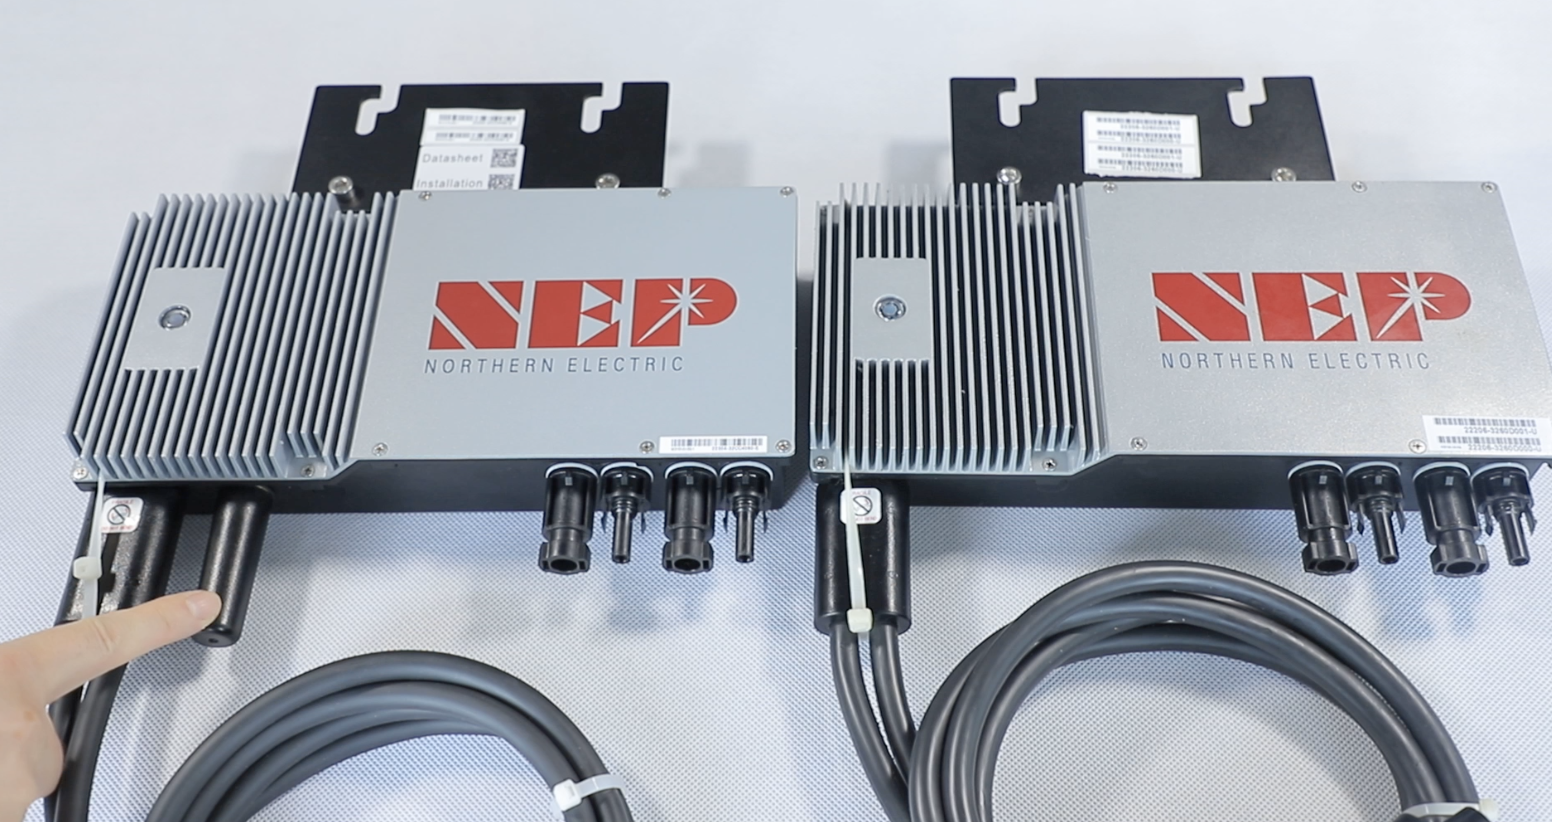 BDM-600X with/PLC with 2.6m ac cable